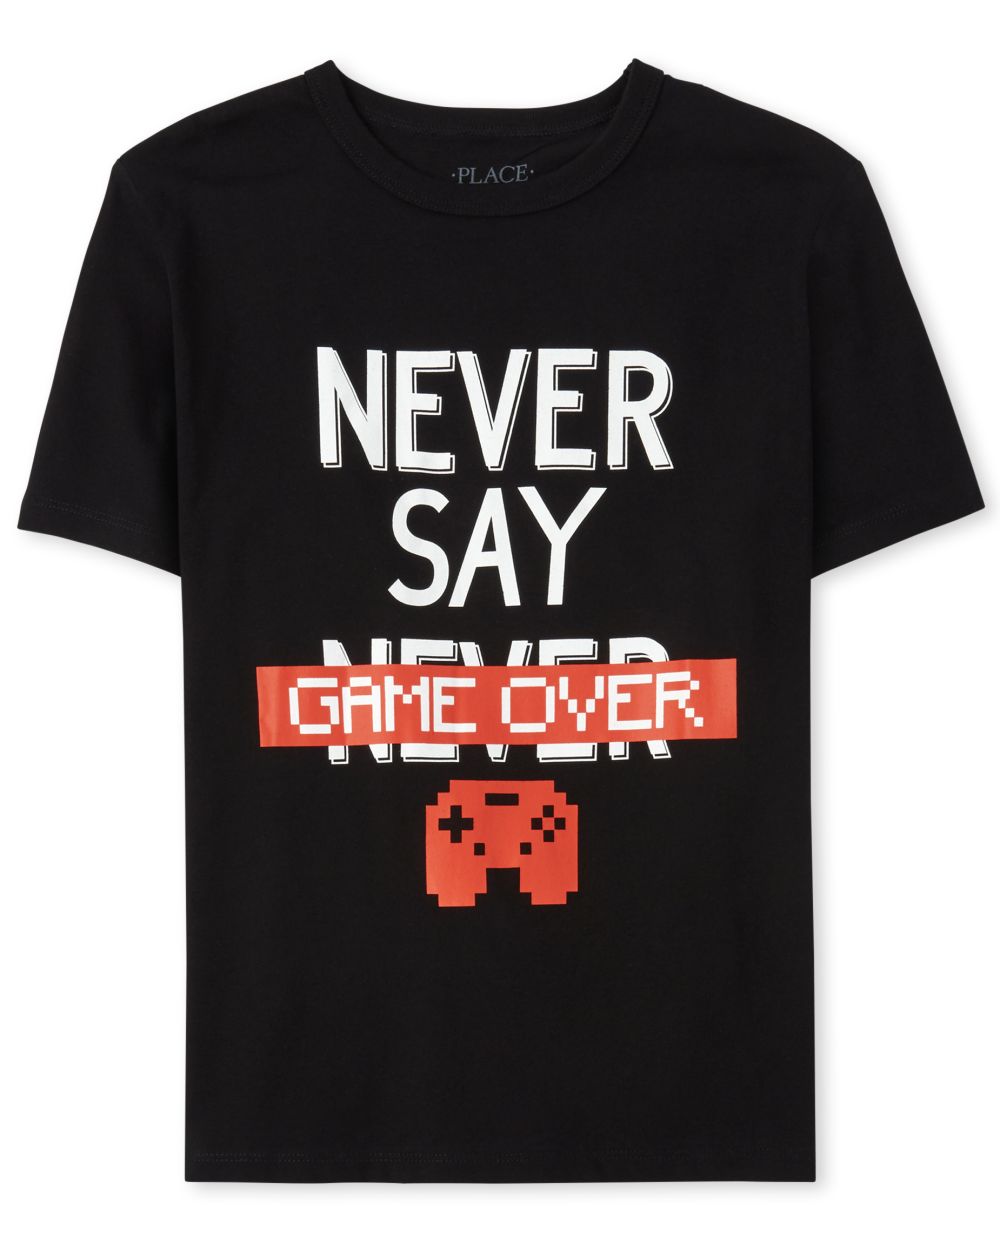 Boys Short Sleeve 'Never Say Game Over' Graphic Tee